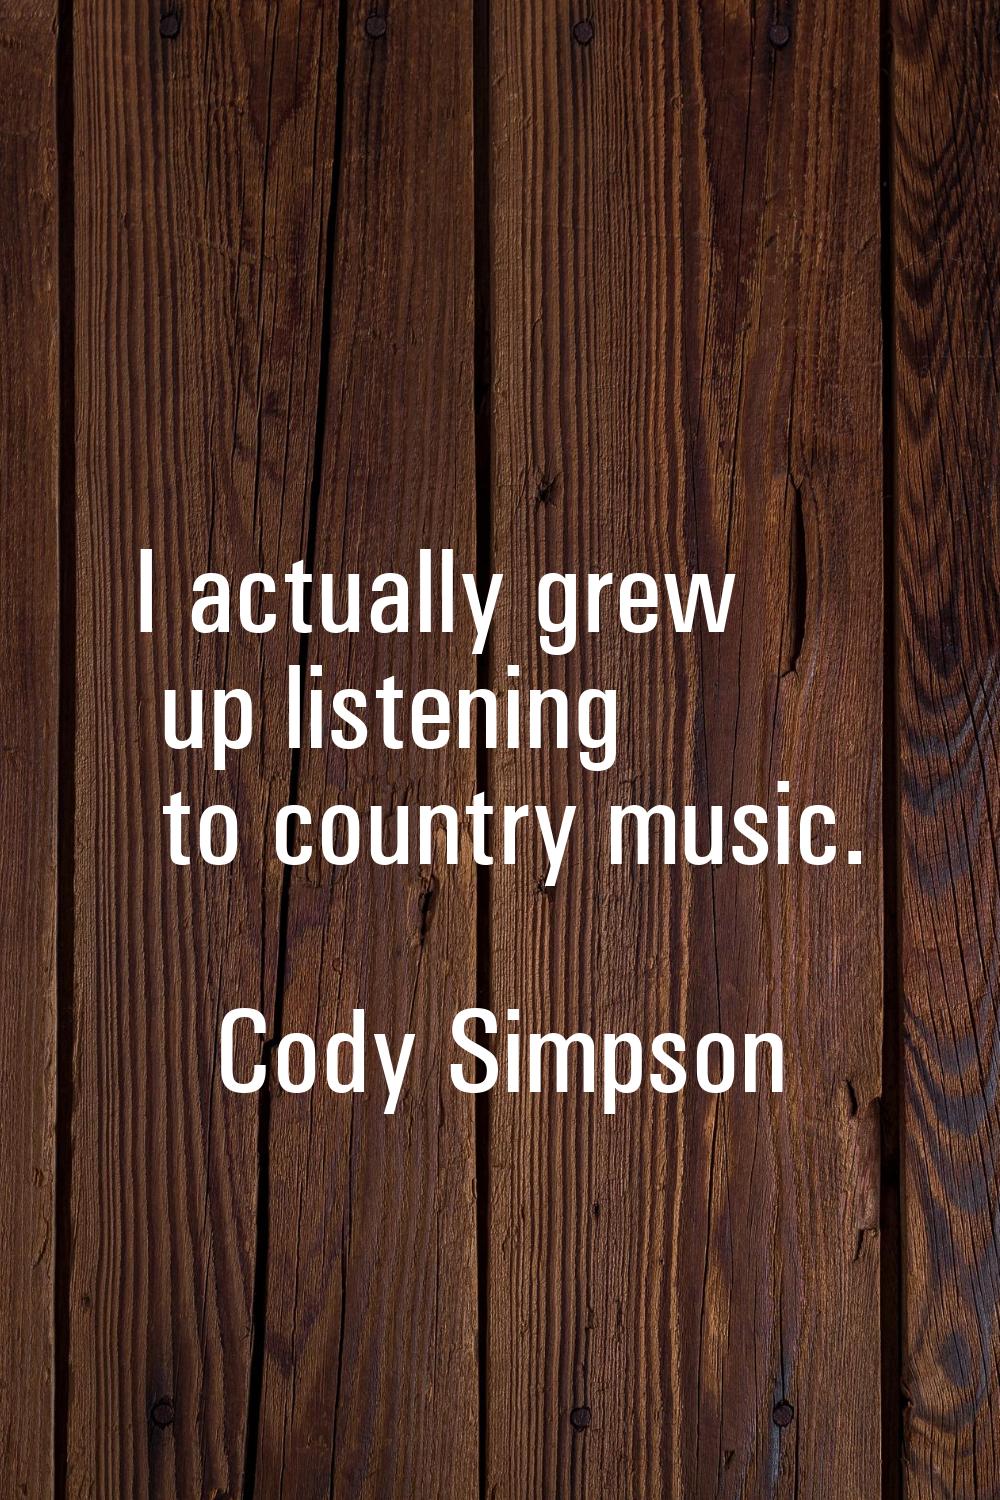 I actually grew up listening to country music.